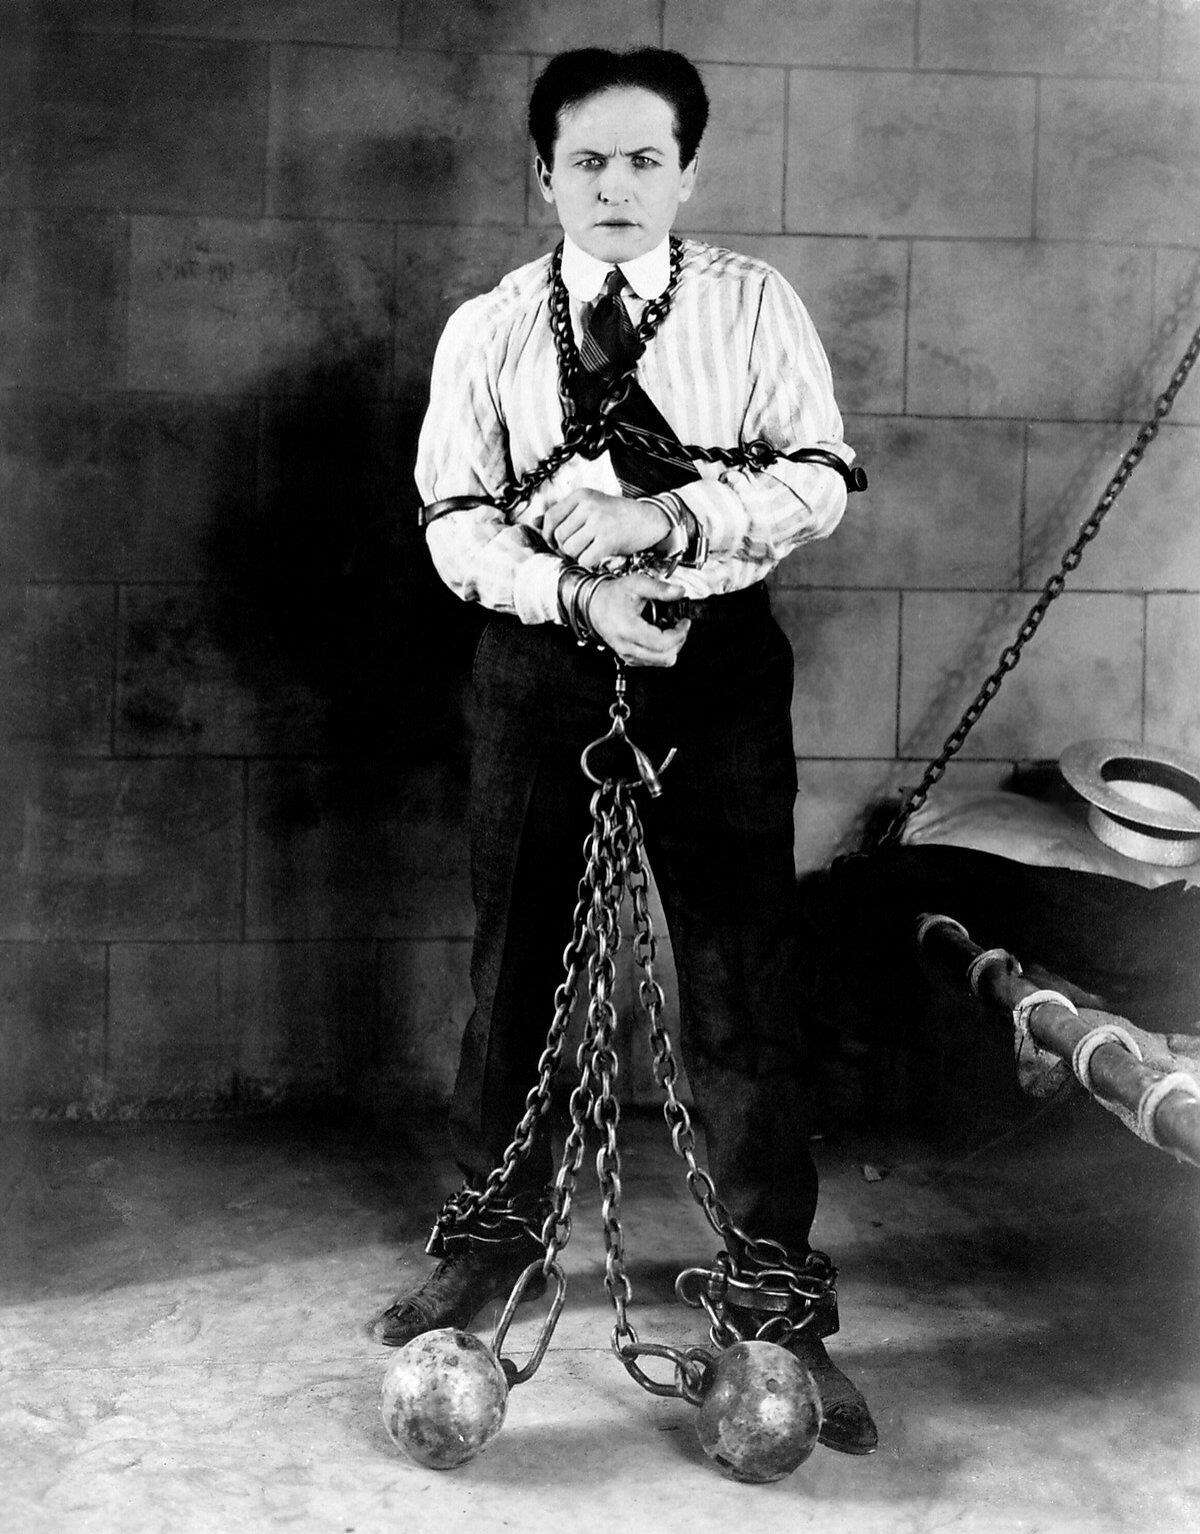 Harry Houdini (1874-1926) was an escape artist and is one of the most famous names in magic. Buried at Machpelah Cemetery, New York City, NY.